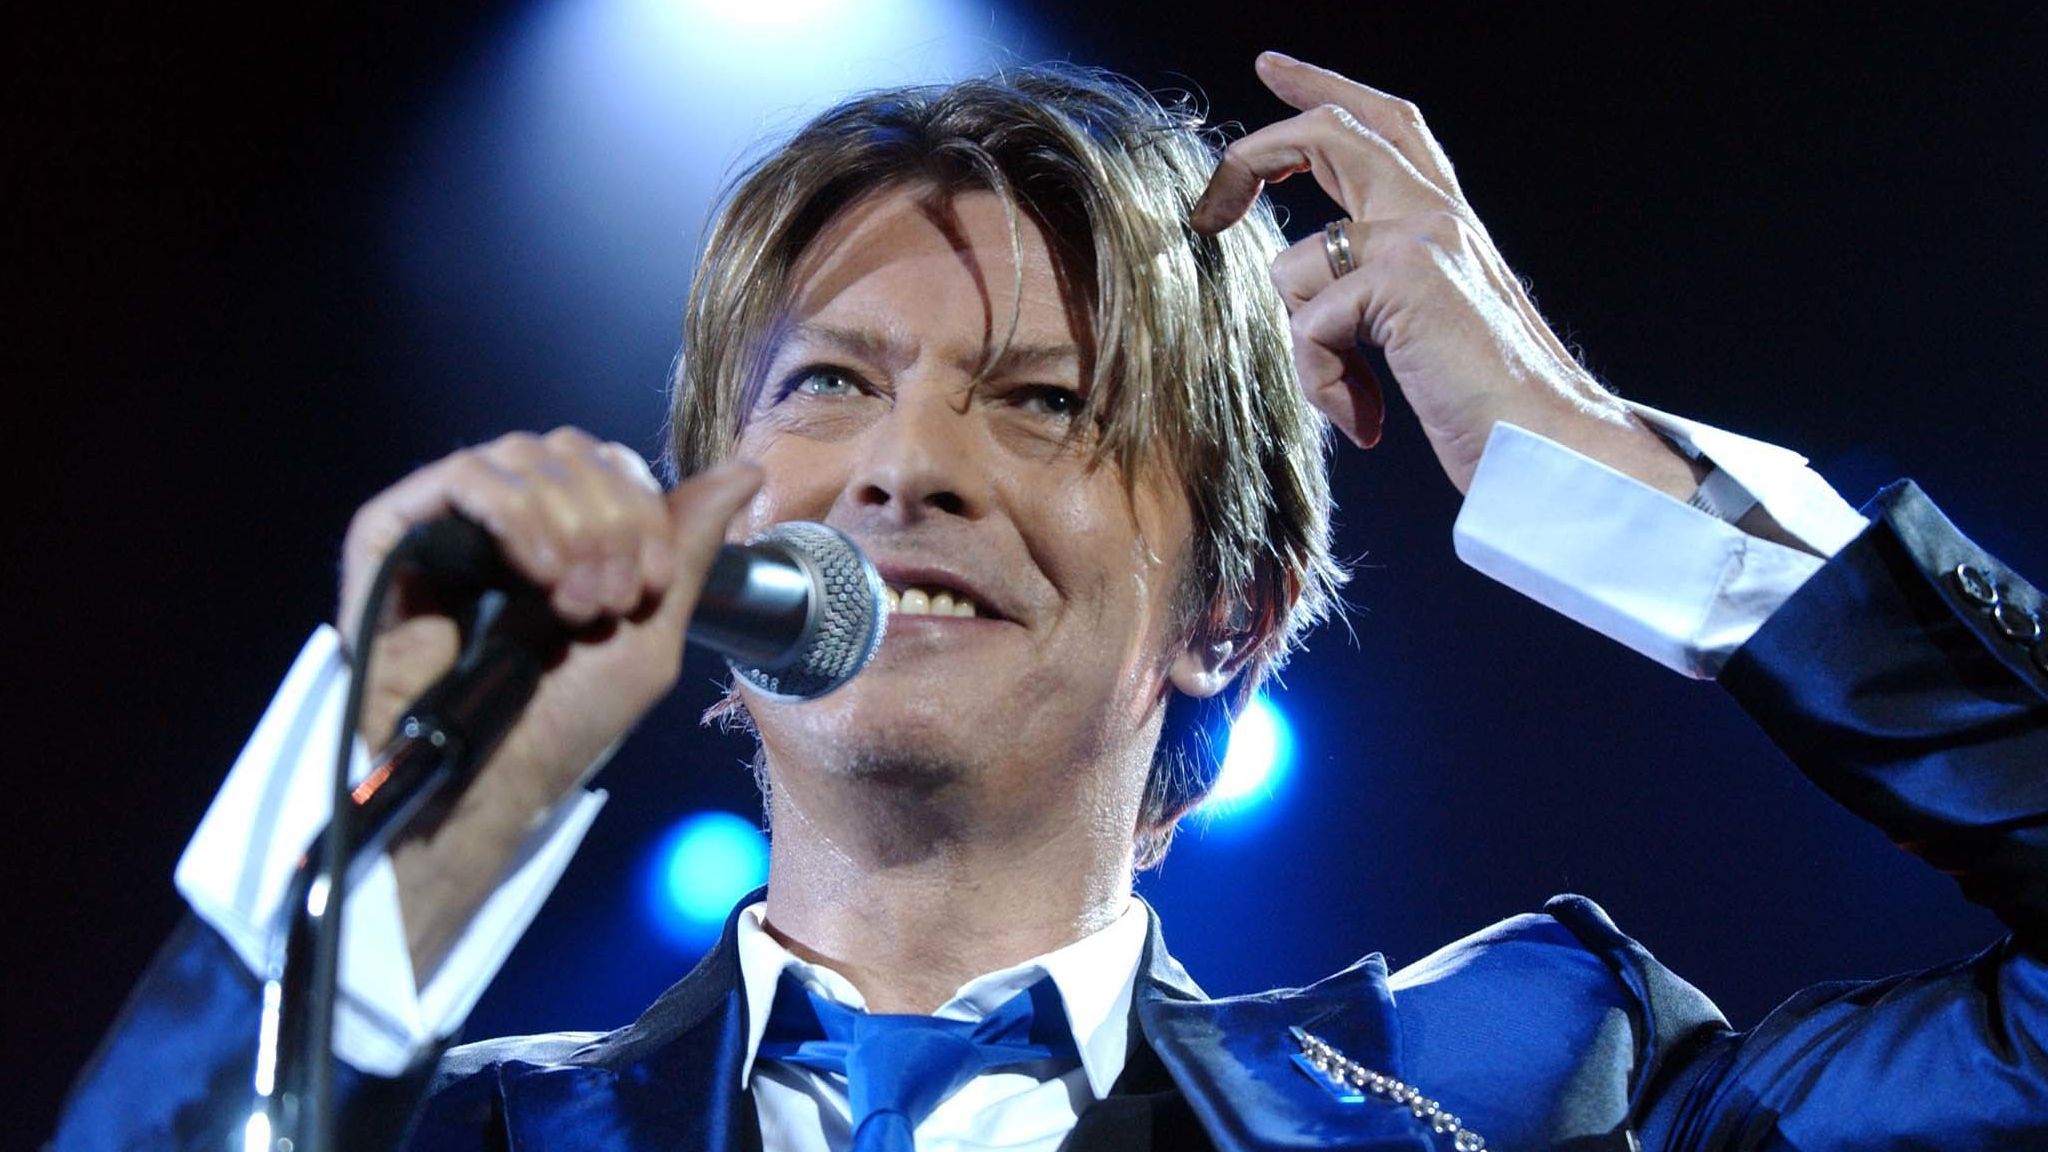 David Bowie back catalogue sells for 'hundreds of millions of dollars' | Ents & Arts News | Sky News